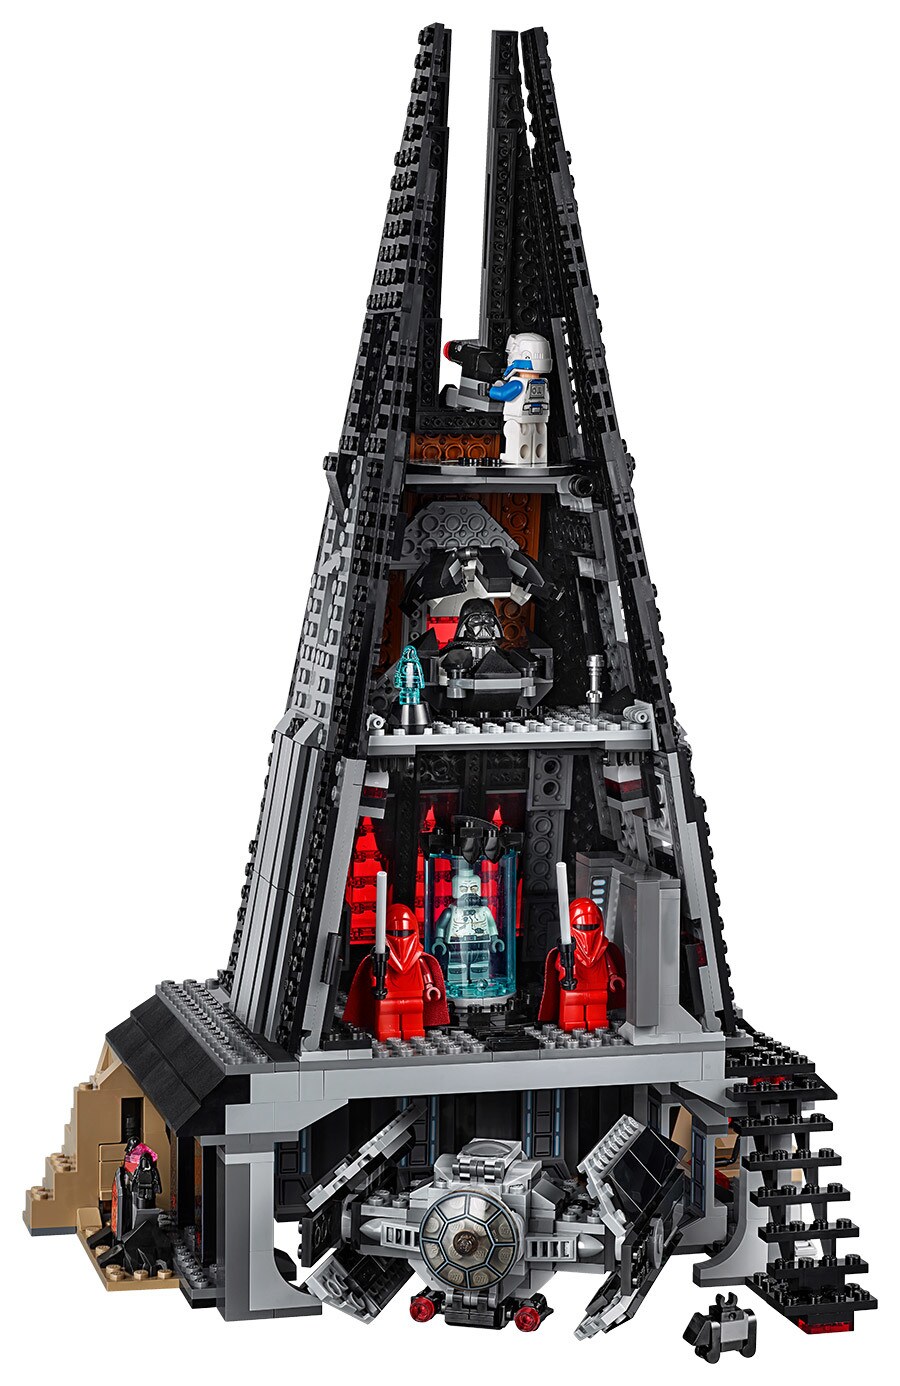 A LEGO toy set of Darth Vader's castle and TIE fighter.